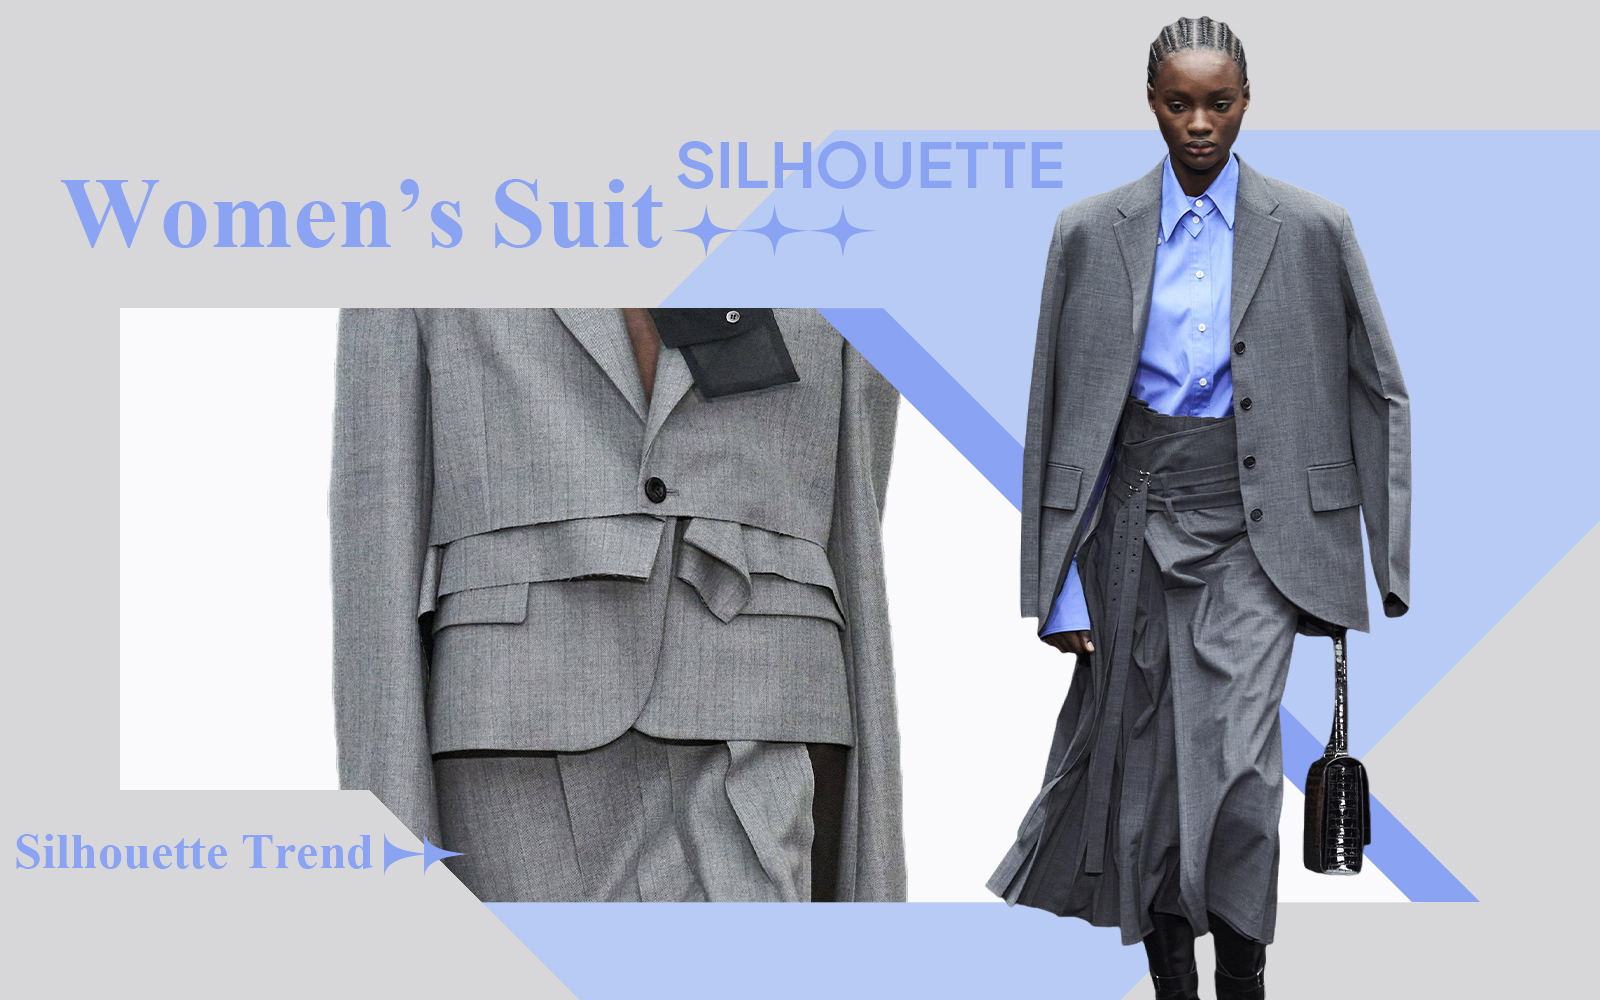 Modern Fashion -- The Silhouette Trend for Women's Suit